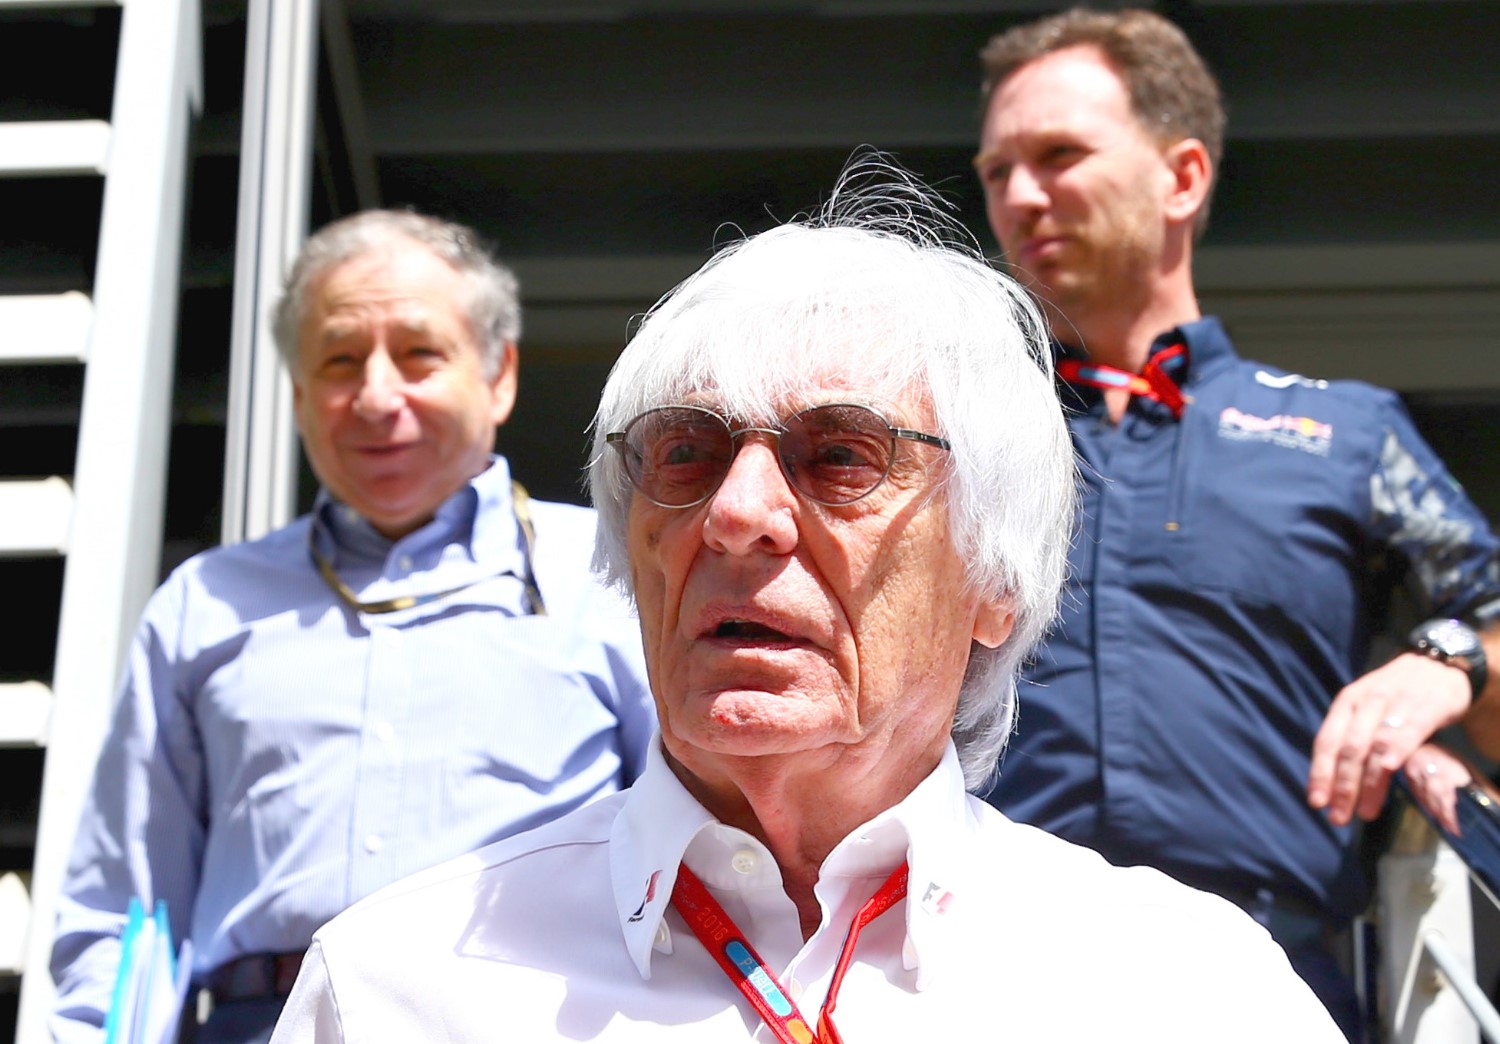 Ecclestone, Todt and Red Bull's Horner.  Bernie knows its nearly impossible to beat an Aldo Costa designed car